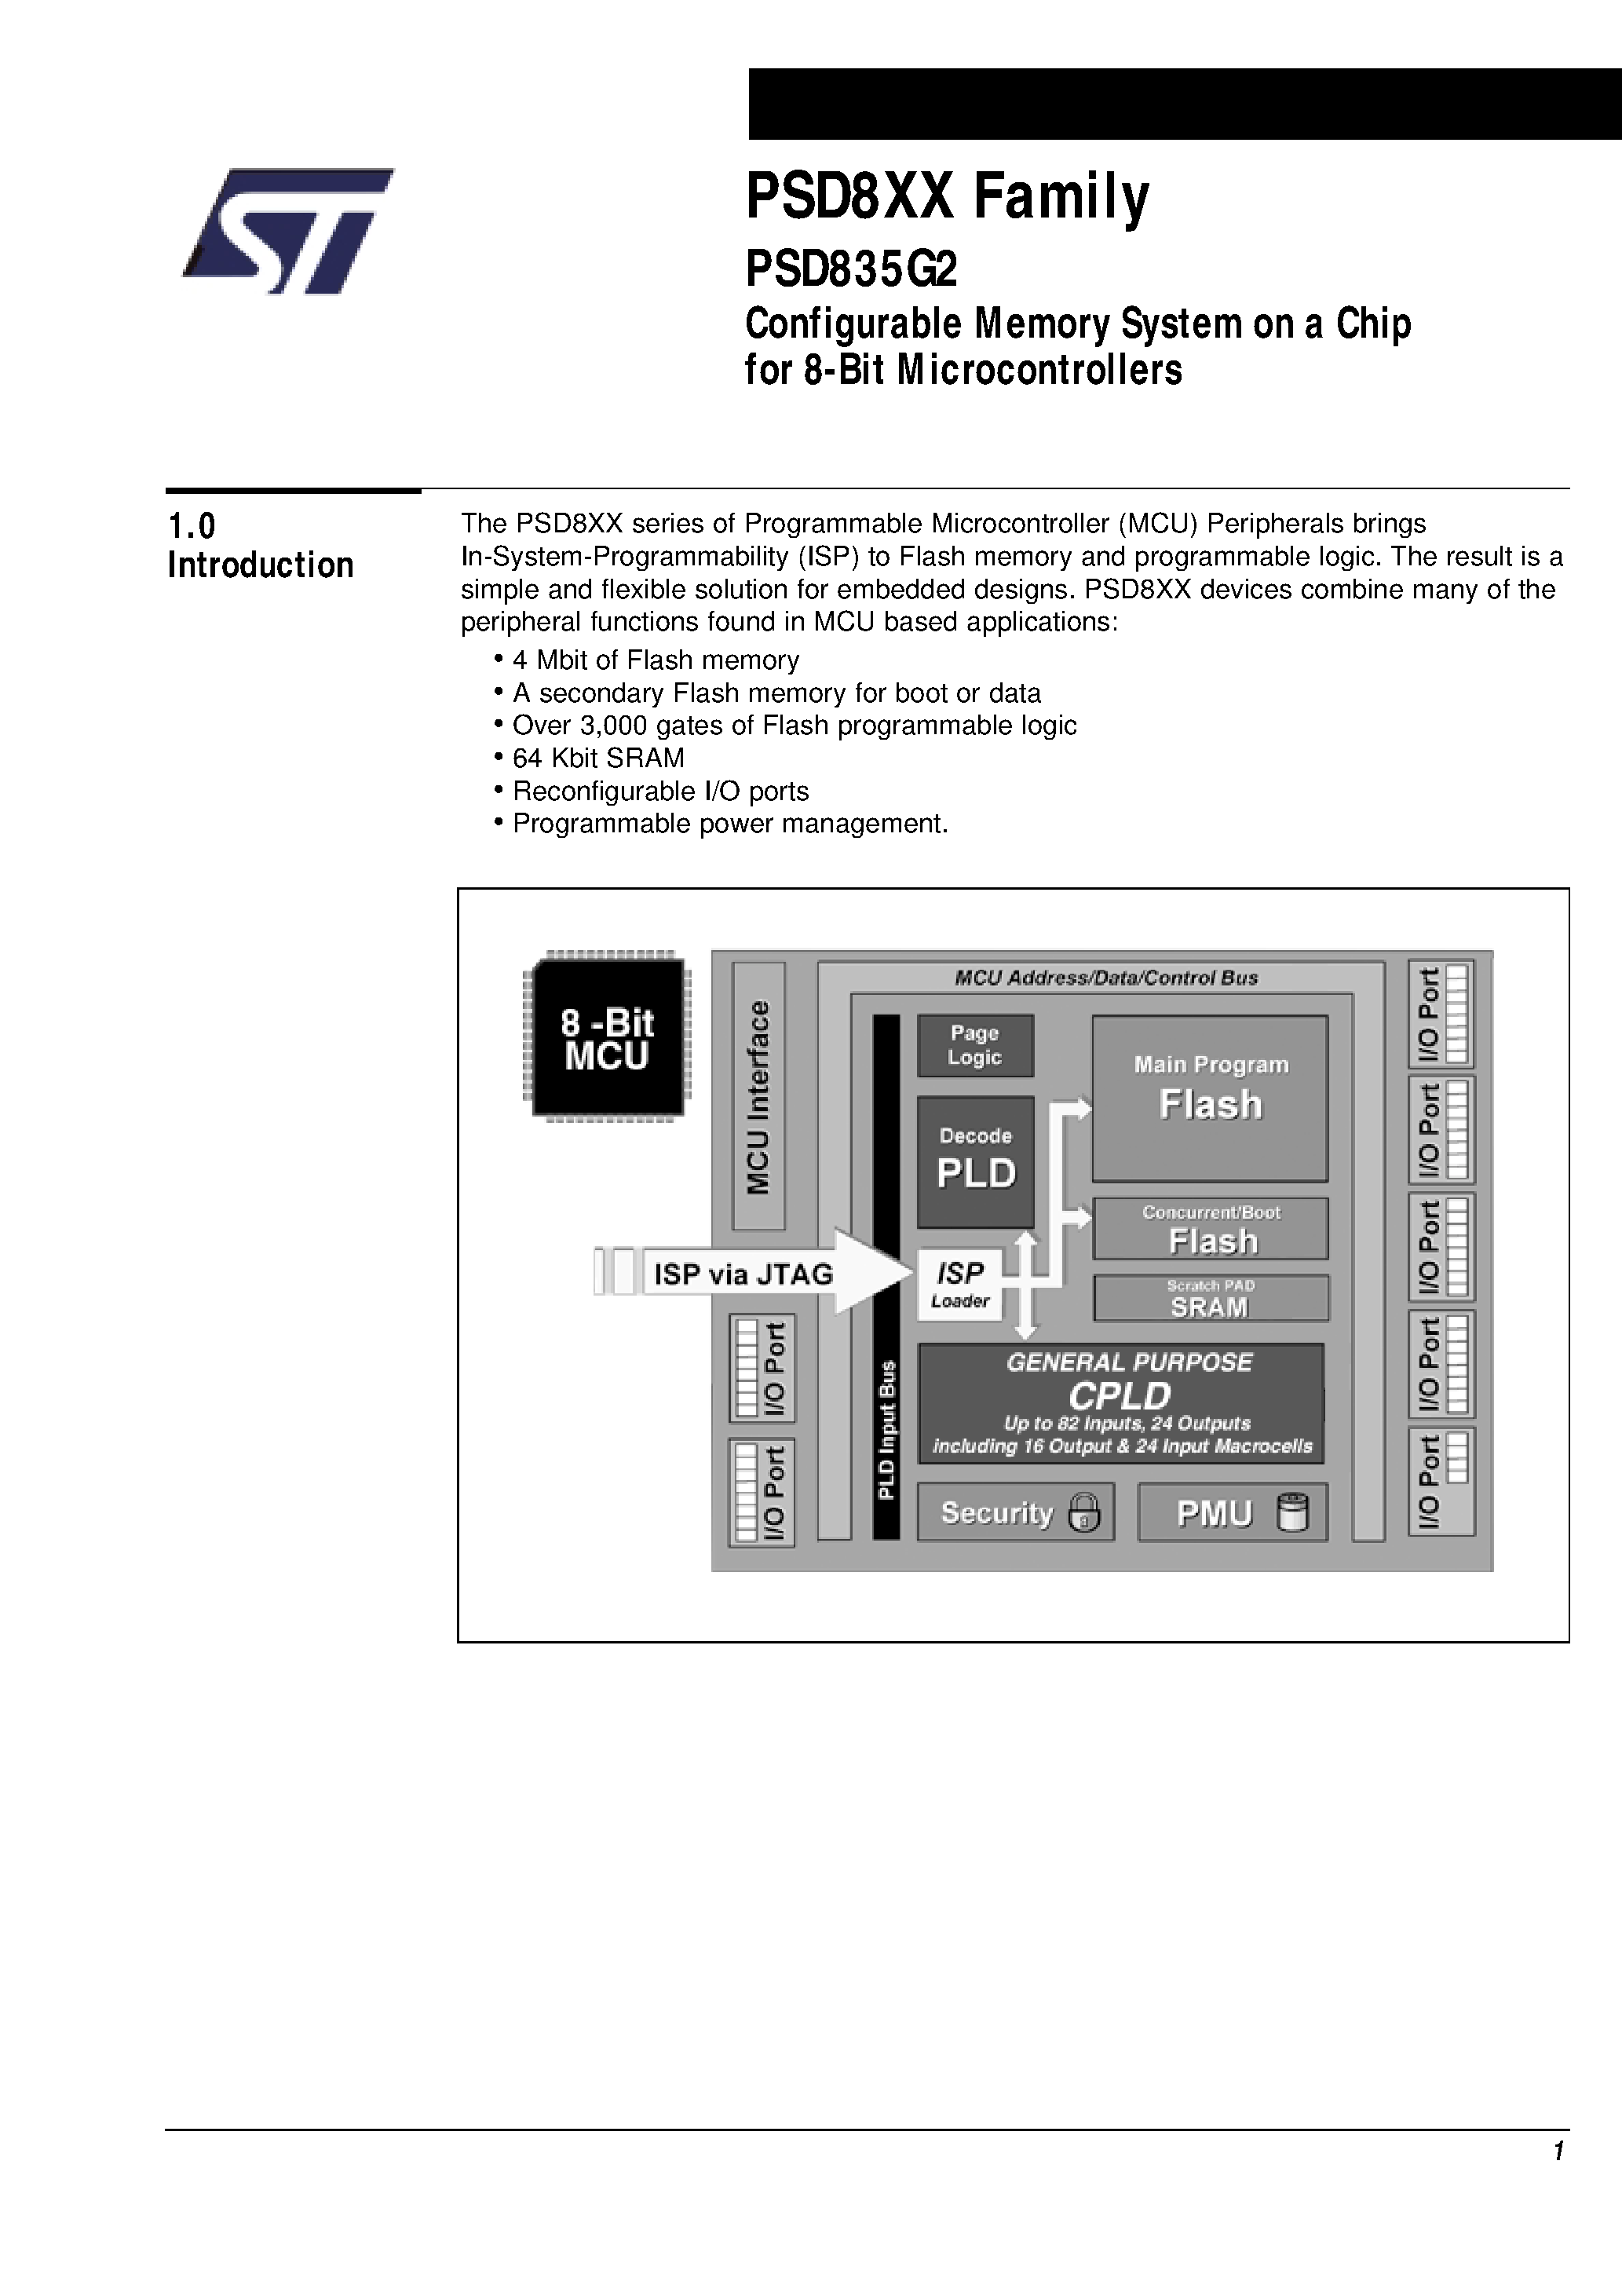 Datasheet PSD835F1-A-15JI - Configurable Memory System on a Chip for 8-Bit Microcontrollers page 2